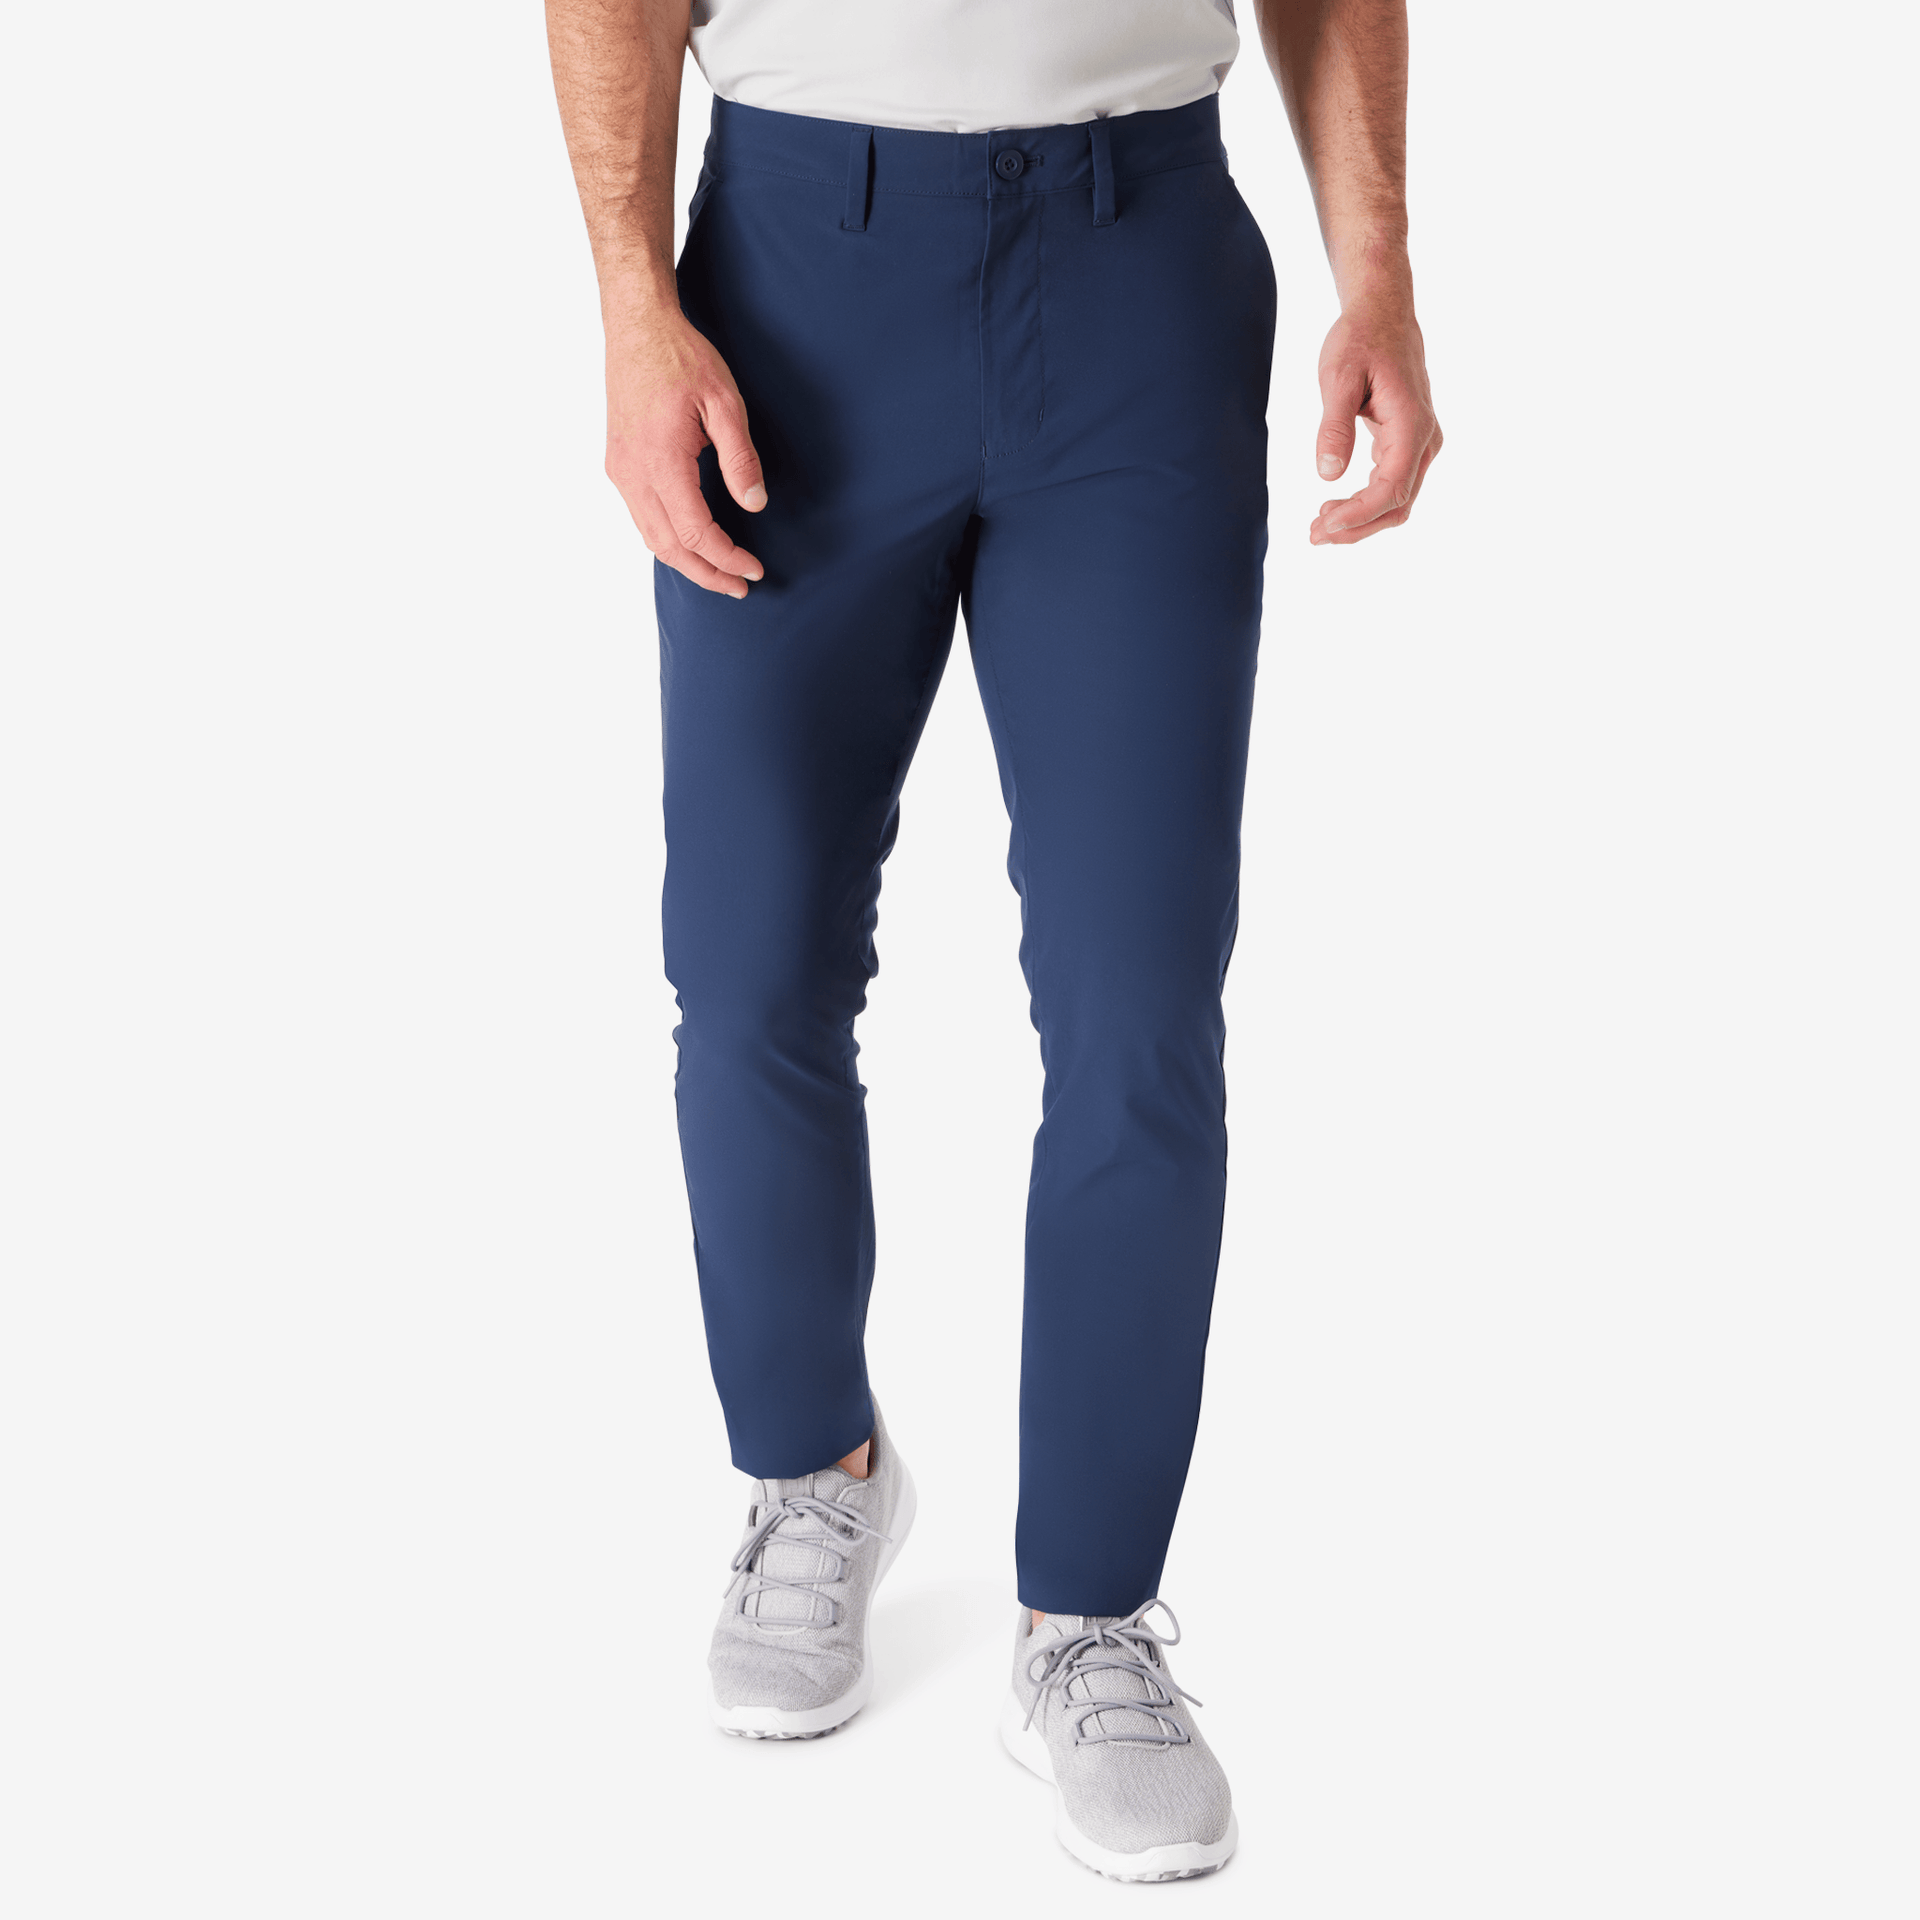 Clubhouse pant Navy 32X30 - Greatness Wins Navy